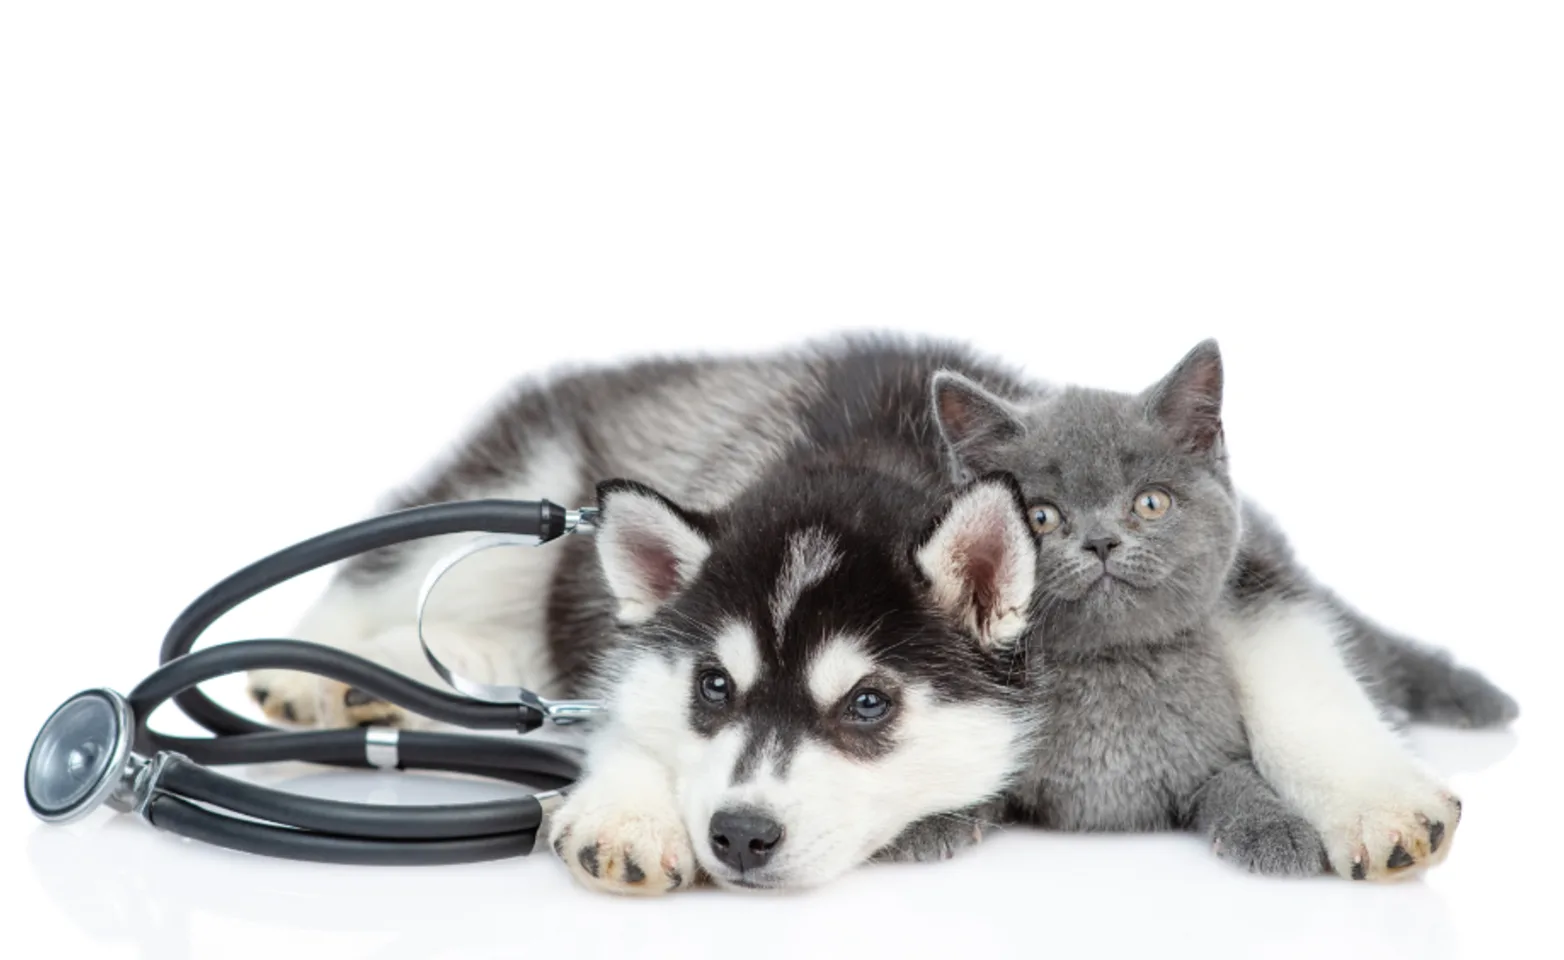 Dog and cat lying down next to a stethoscope